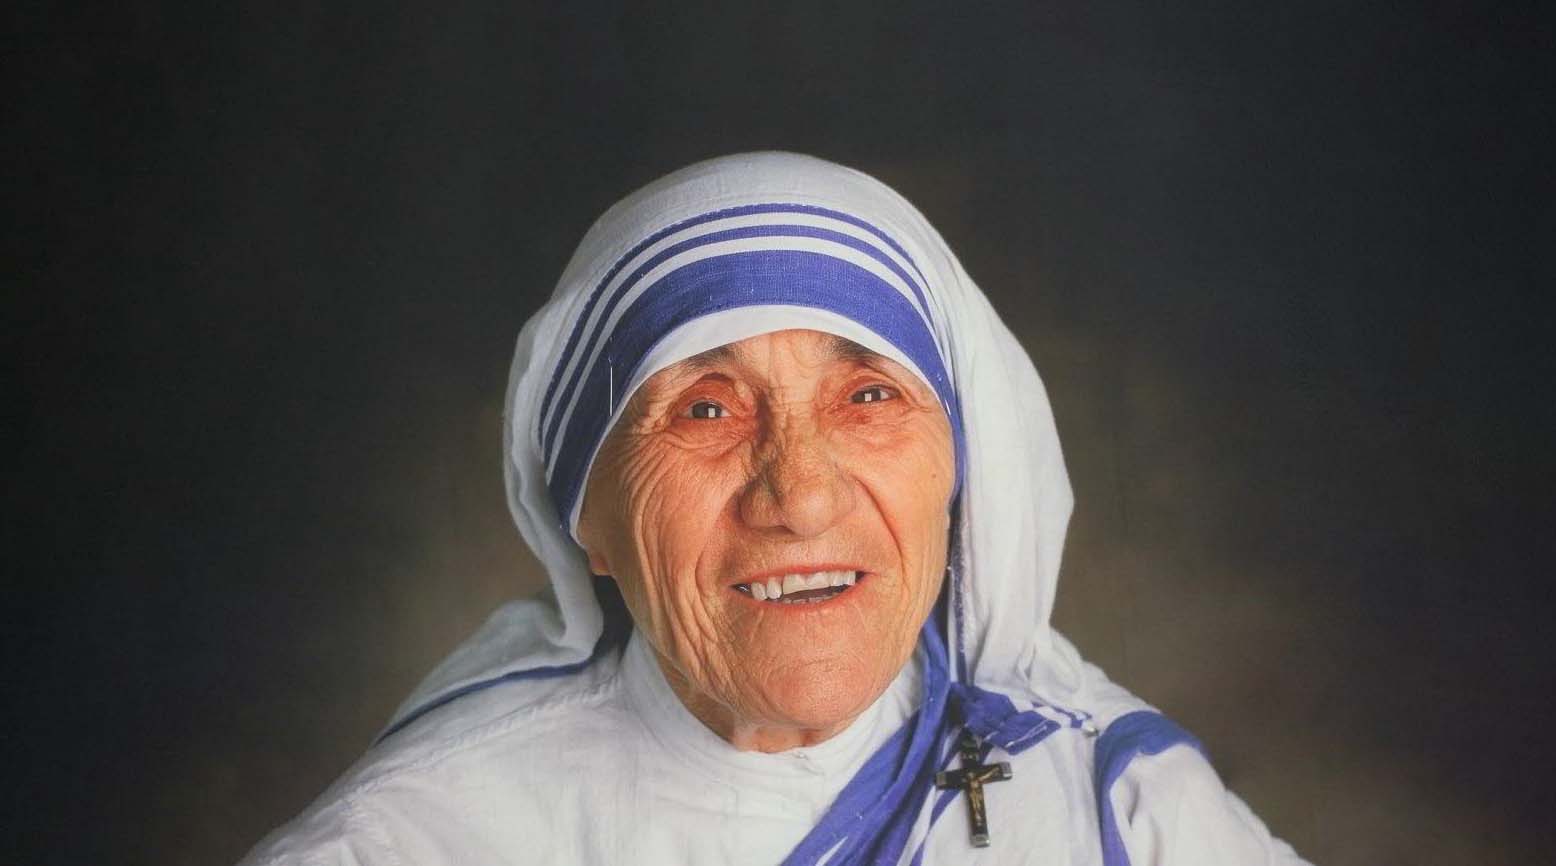 WTF Mother Teresa Facts - Mother Teresa once suggested that AIDS might be a just retribution for improper sexual conduct.-u/KaliMaaaa